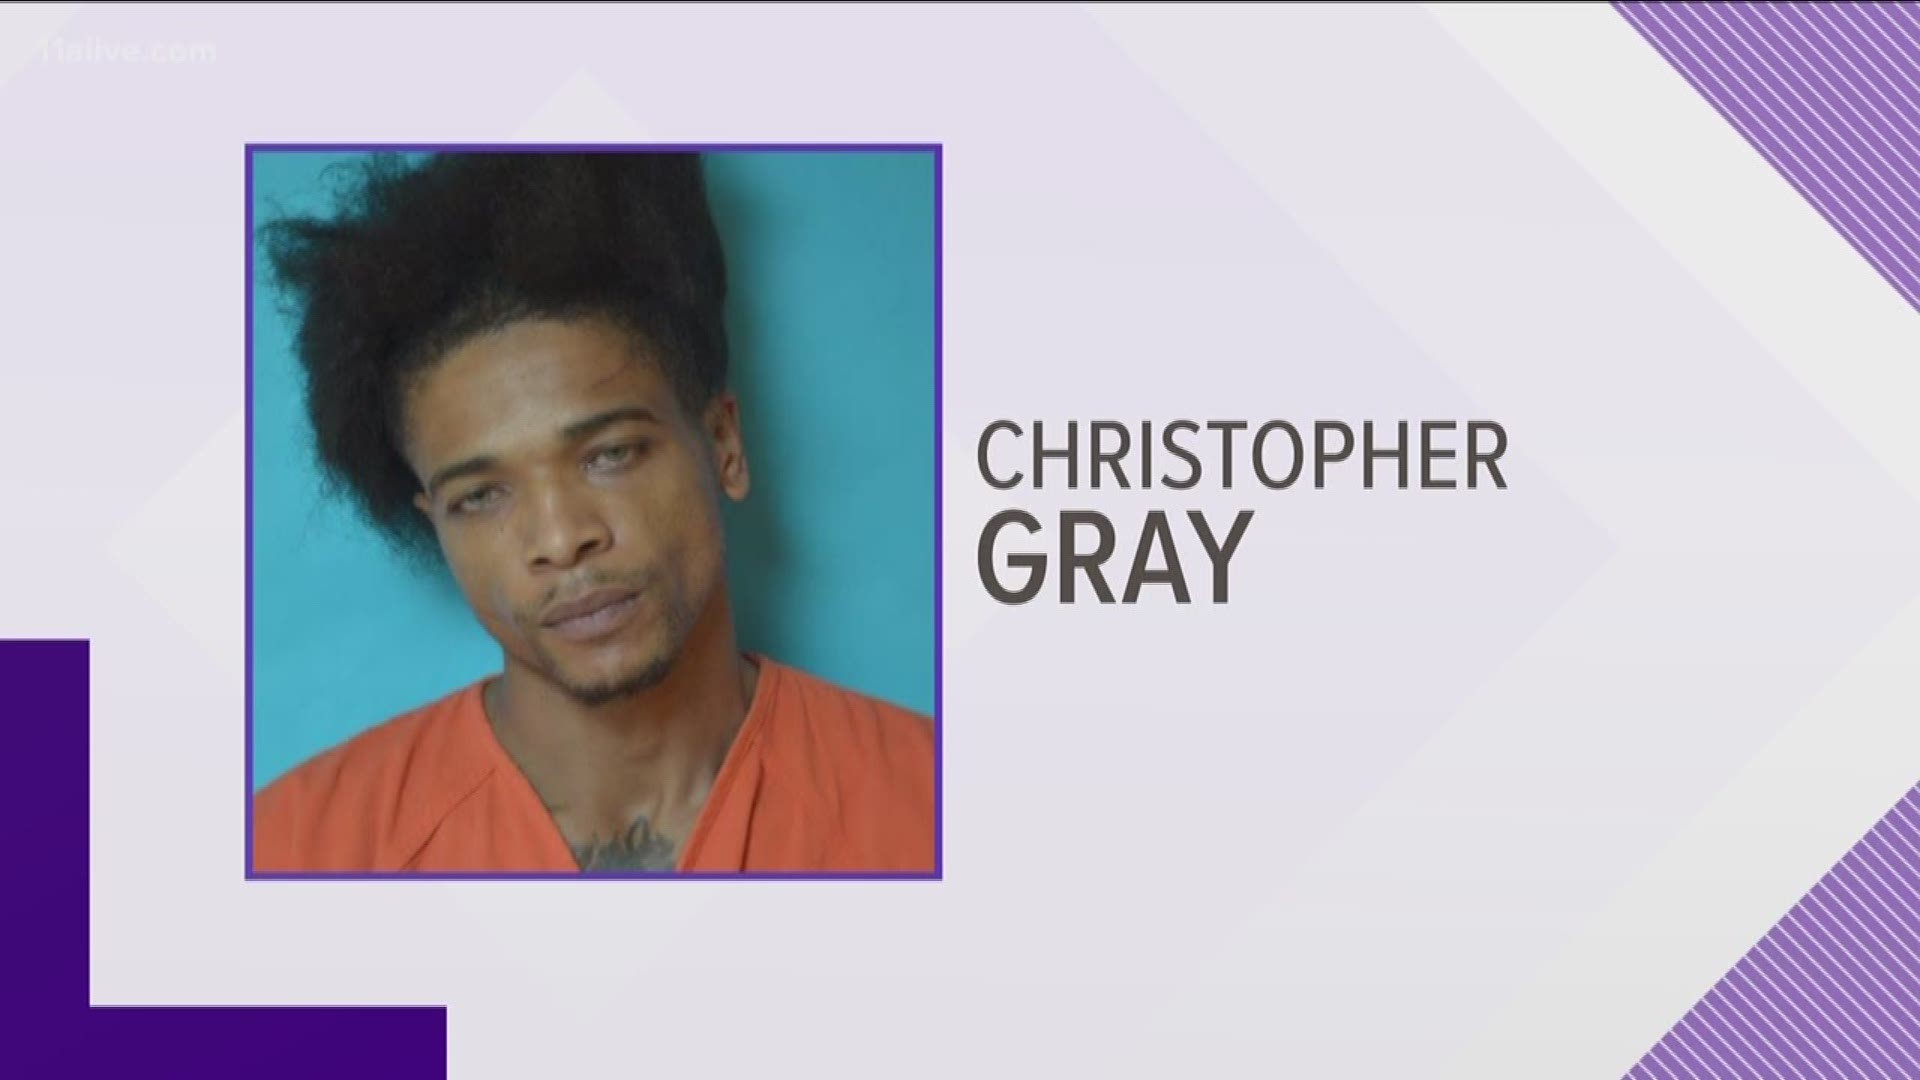 Christopher Gray was arrested.